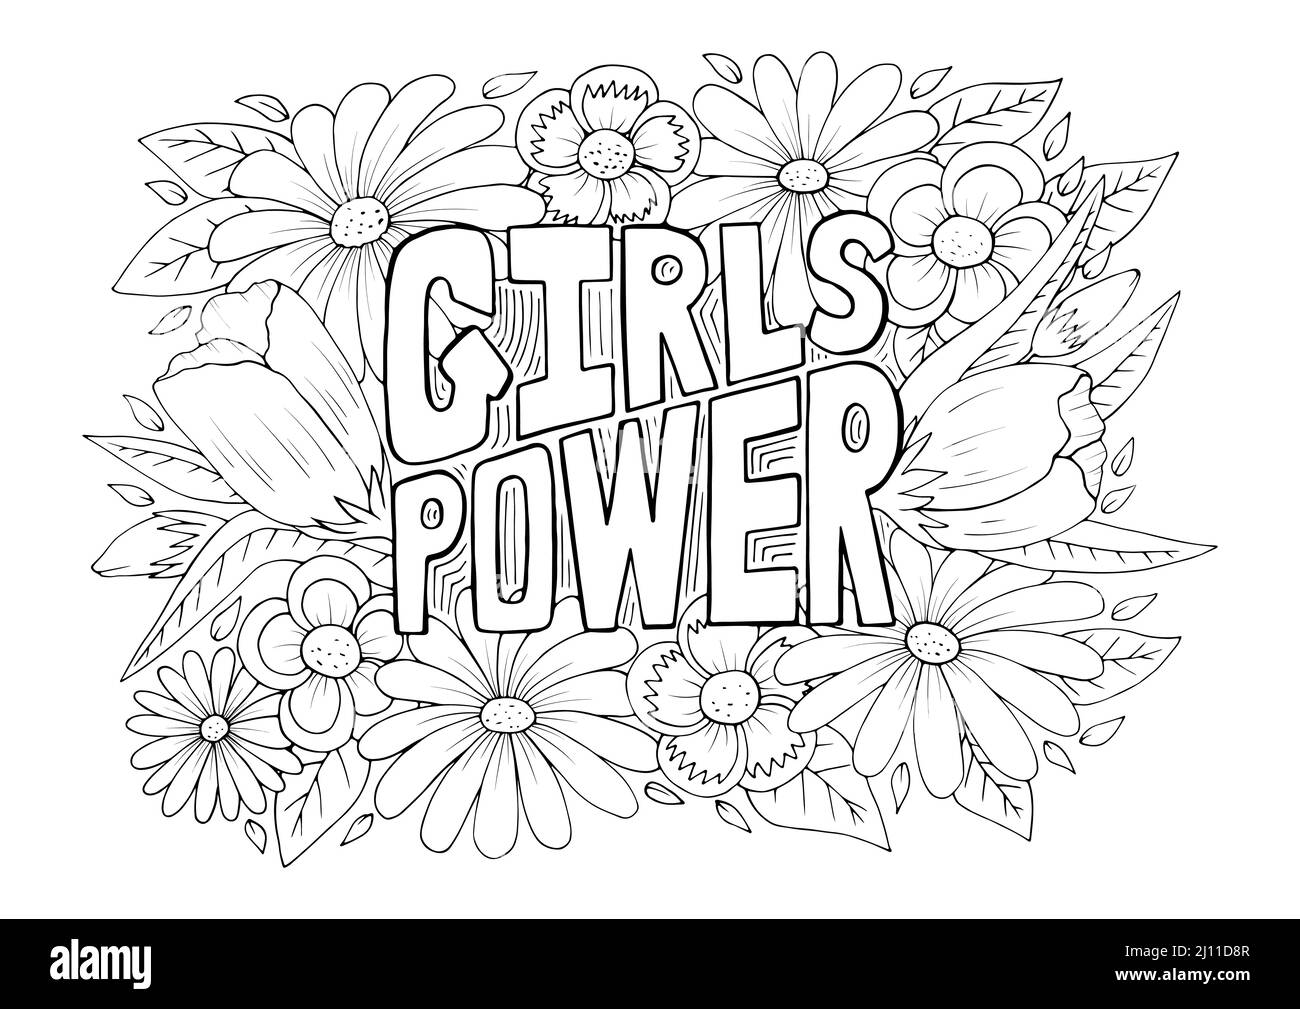 Girl Power slogan with floral background anti stress coloring page design, hand drawn vector illustration. Feminist saying for  t-shirts, posters, car Stock Vector